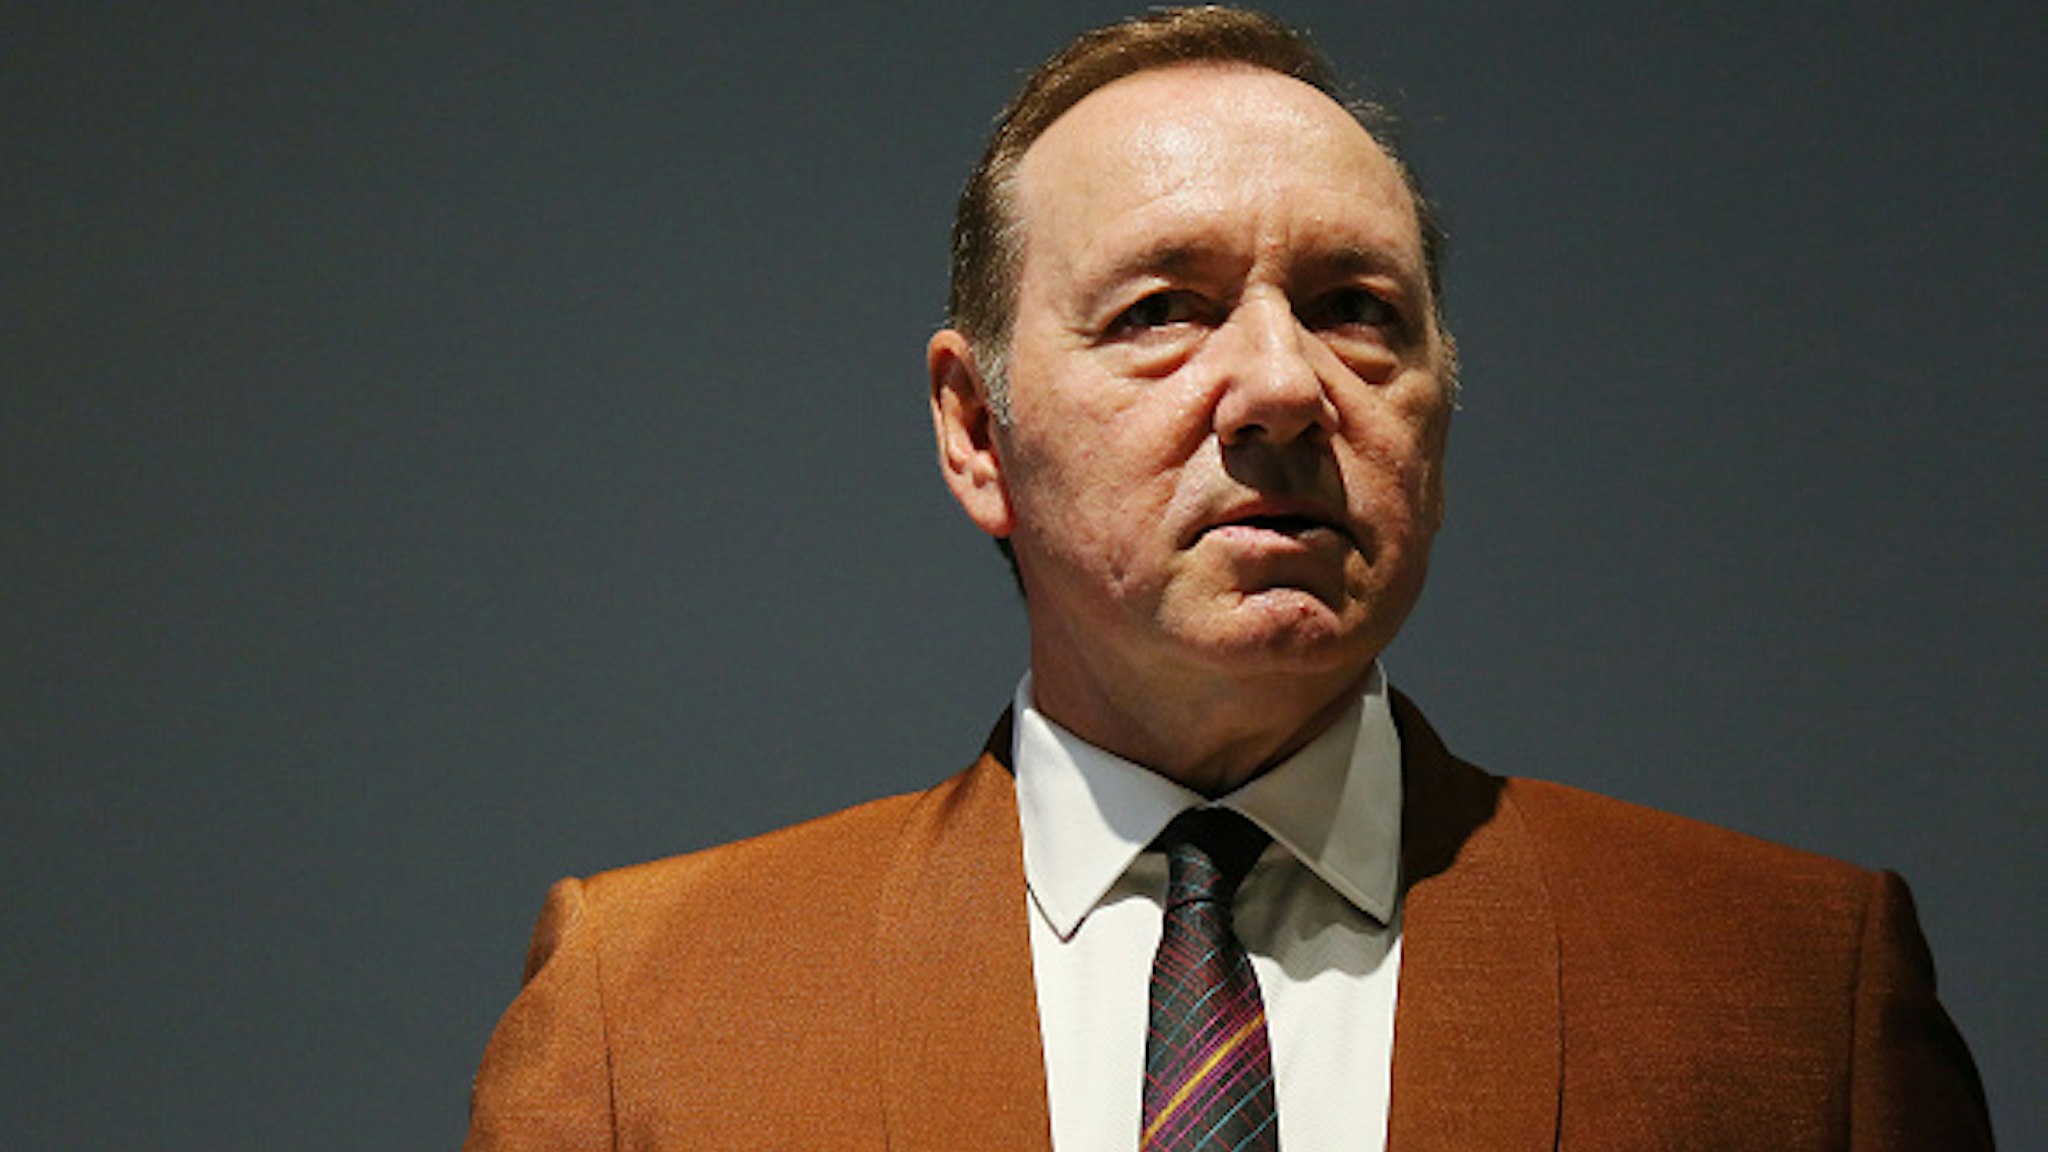 ROME, ITALY - AUGUST 02: Actor Kevin Spacey attends the reading of the event "The Boxer - La nostalgia del poeta" (The Boxer - The nostalgia of the poet) at Palazzo Massimo alle Terme on August 02, 2019 in Rome, Italy.